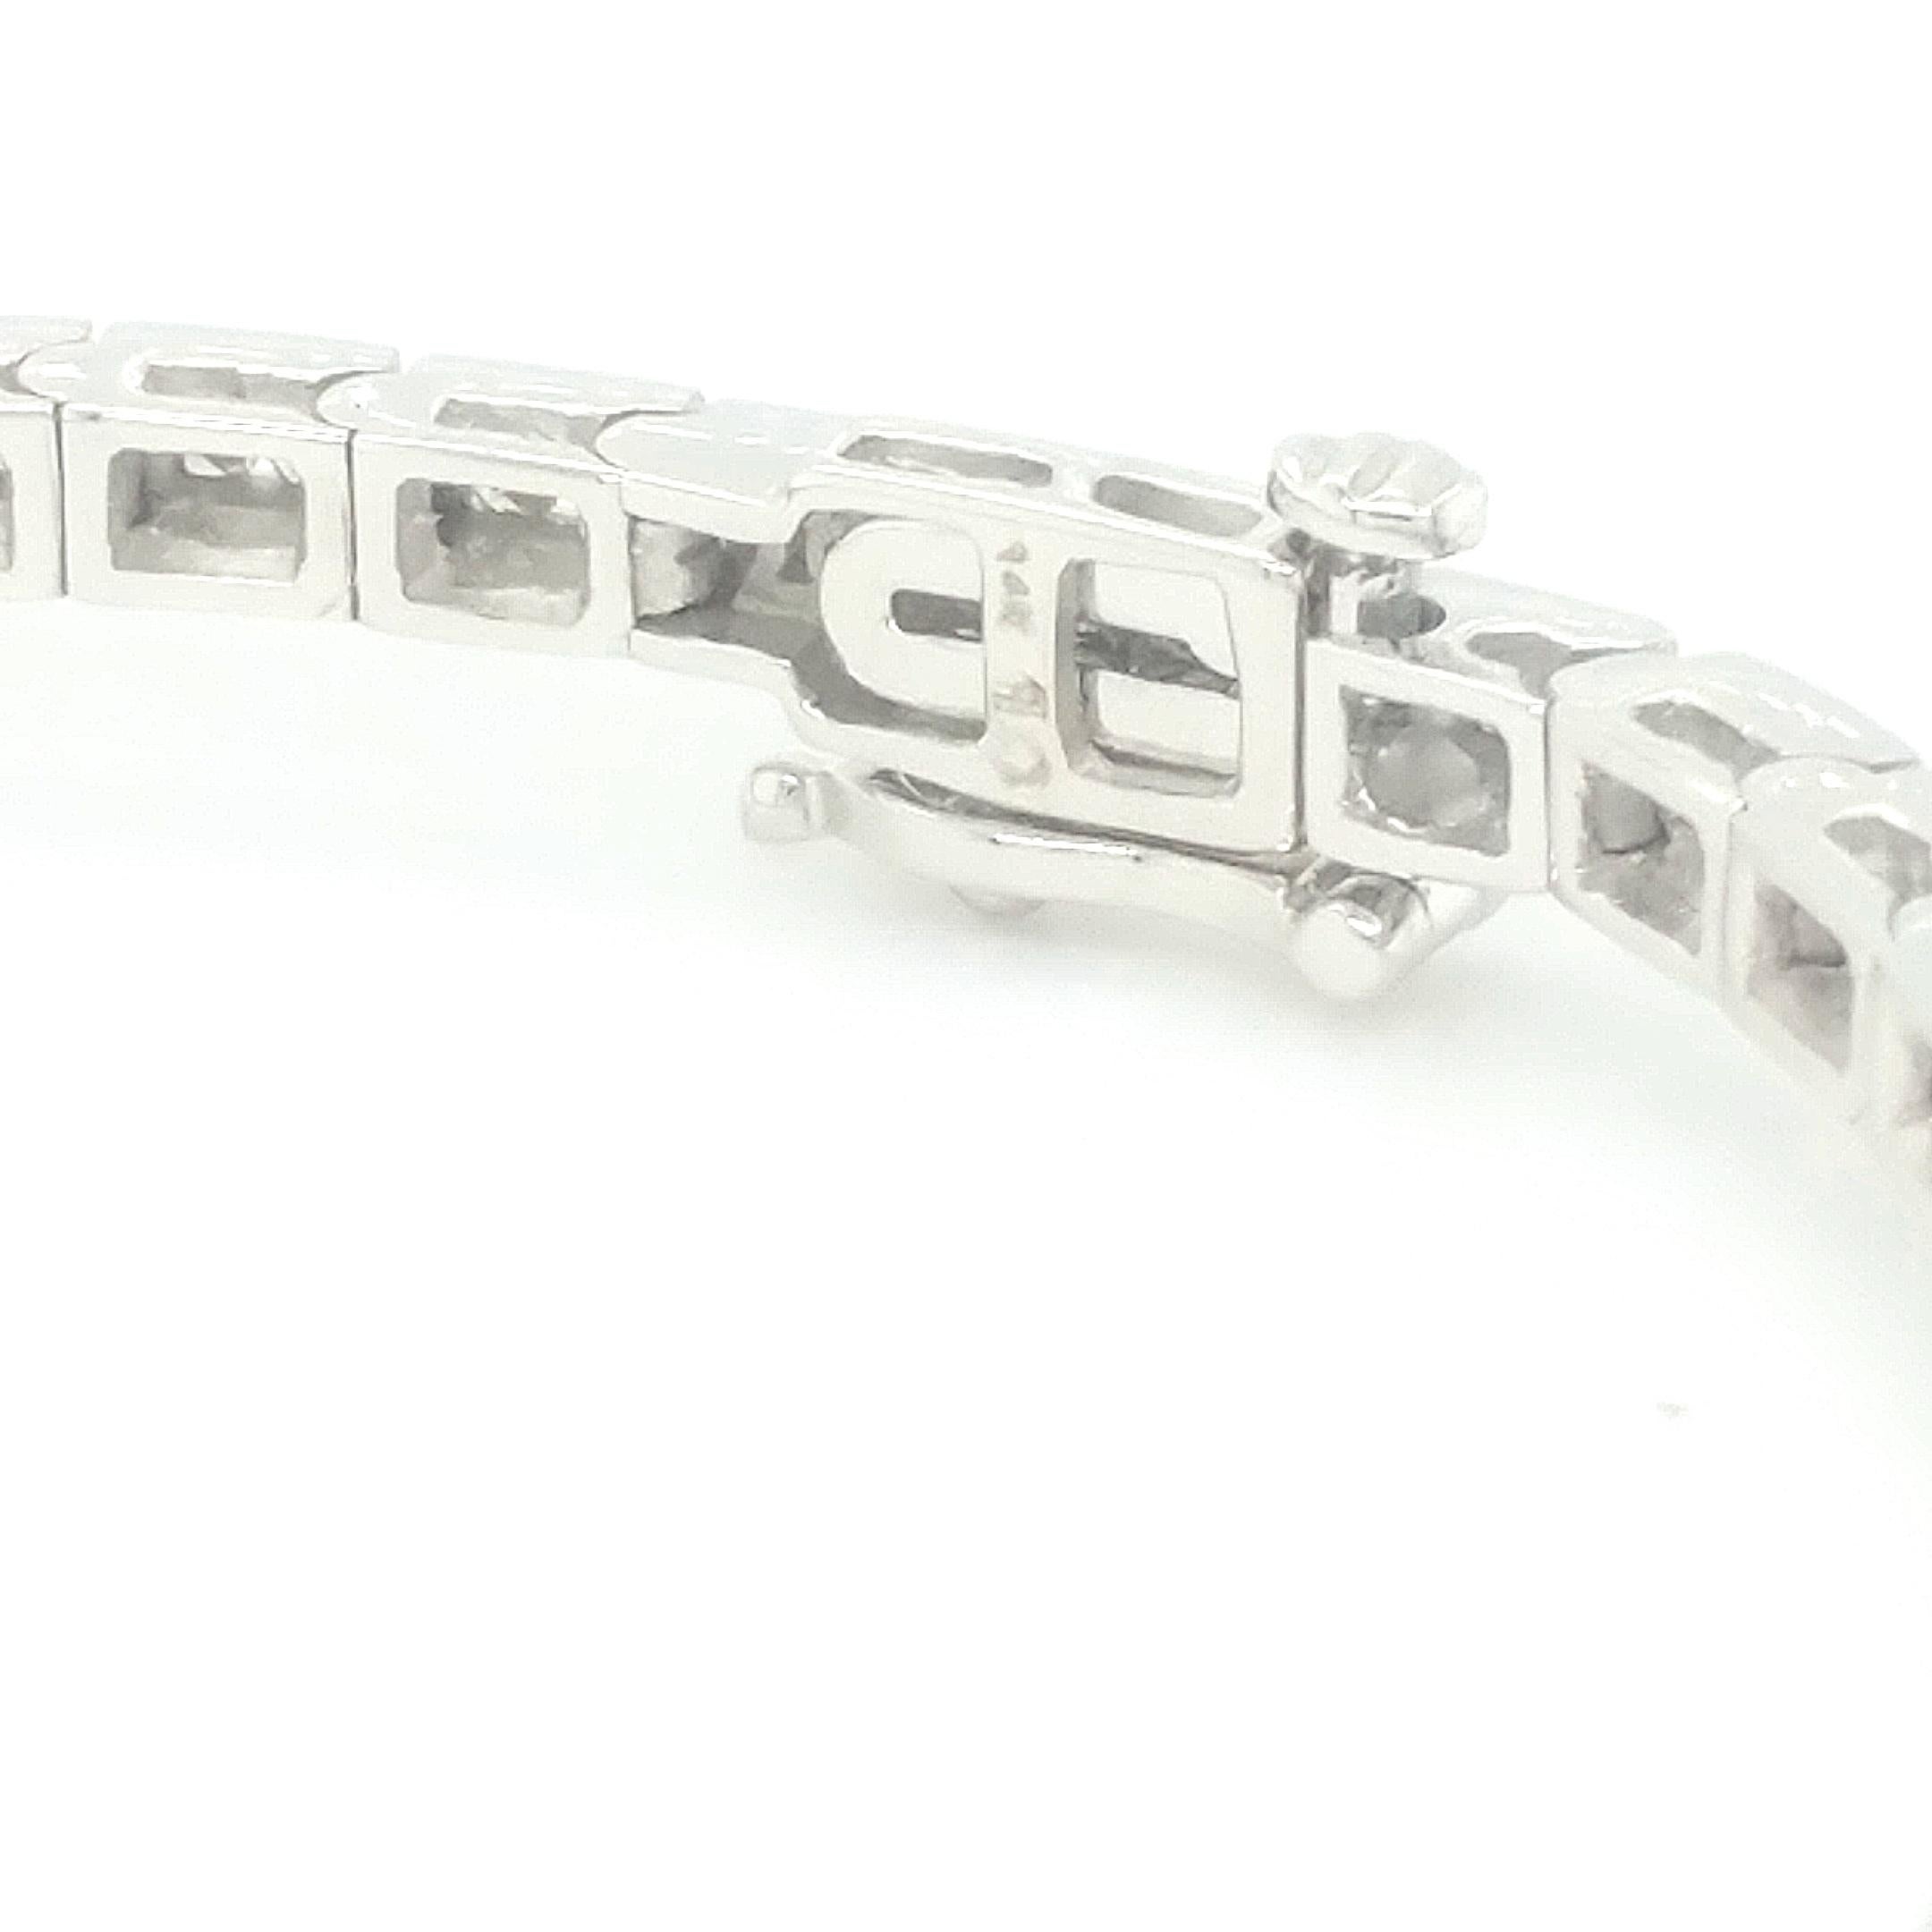 A beautiful white gold bracelet set with round brilliant cut white diamonds. This bracelet is studded with 96 round brilliant cut diamonds. All the stones are channel set. The total diamond weight is 1.00ct. The white diamonds are H-I color and